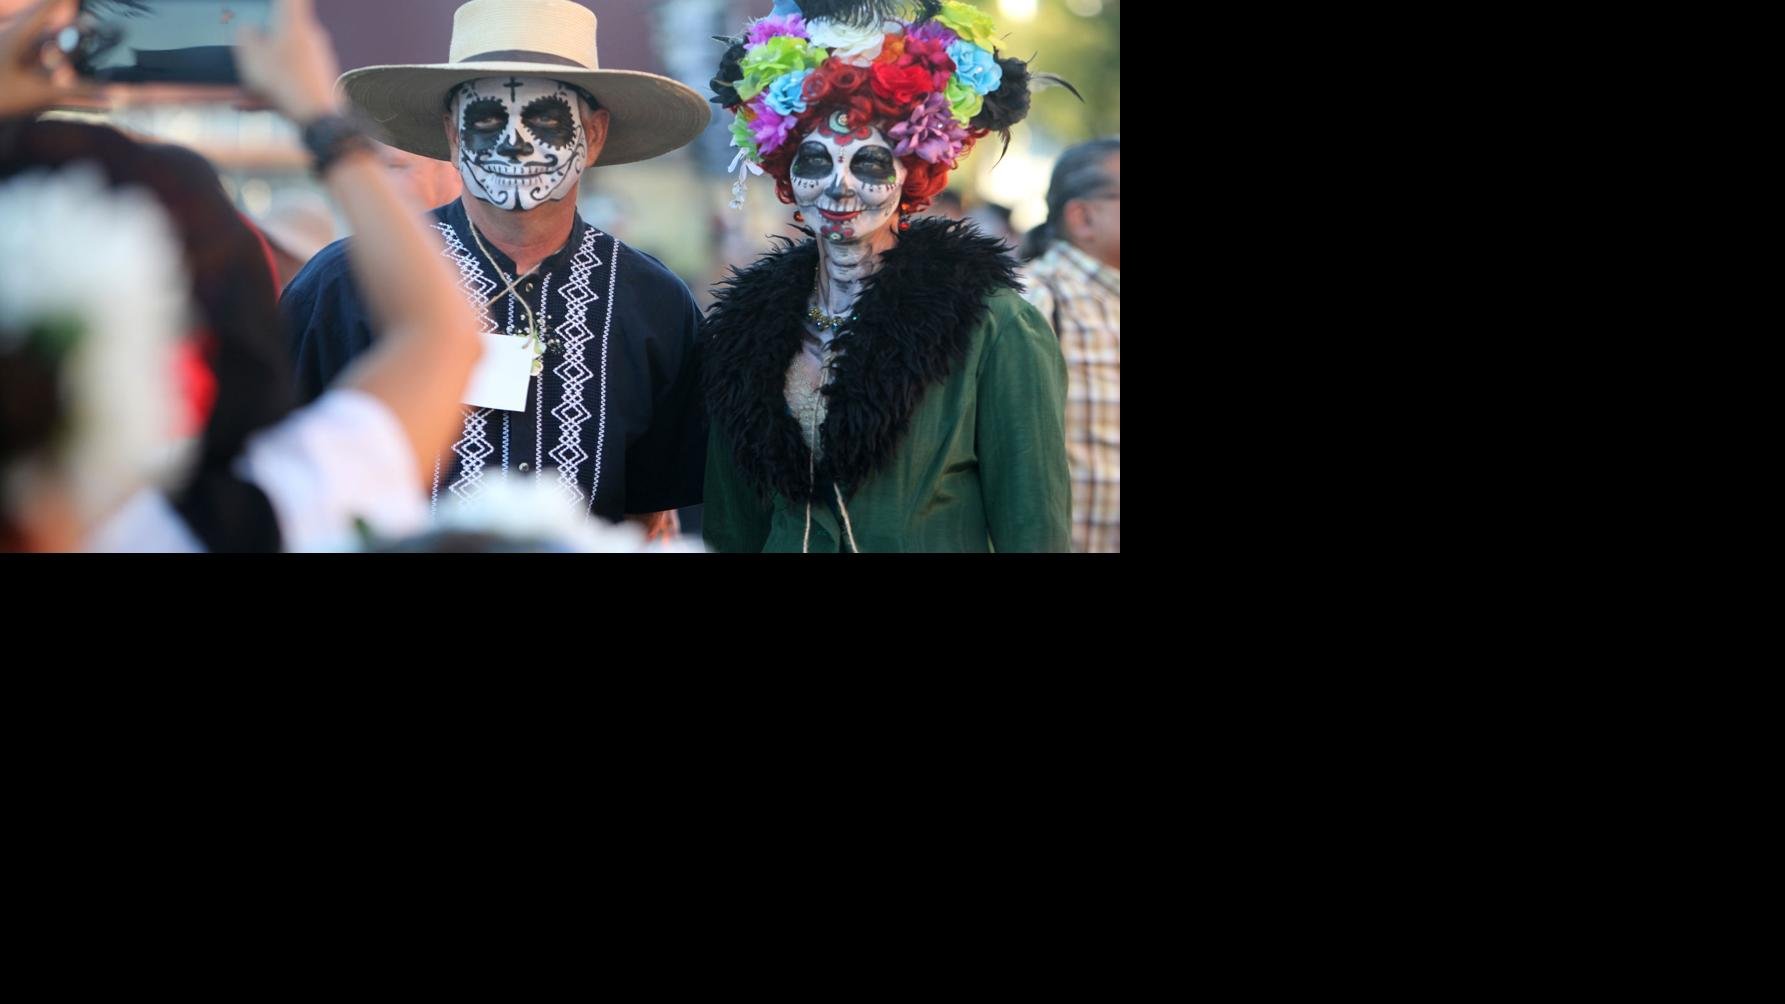 Your guide to this year's All Souls Procession in Tucson